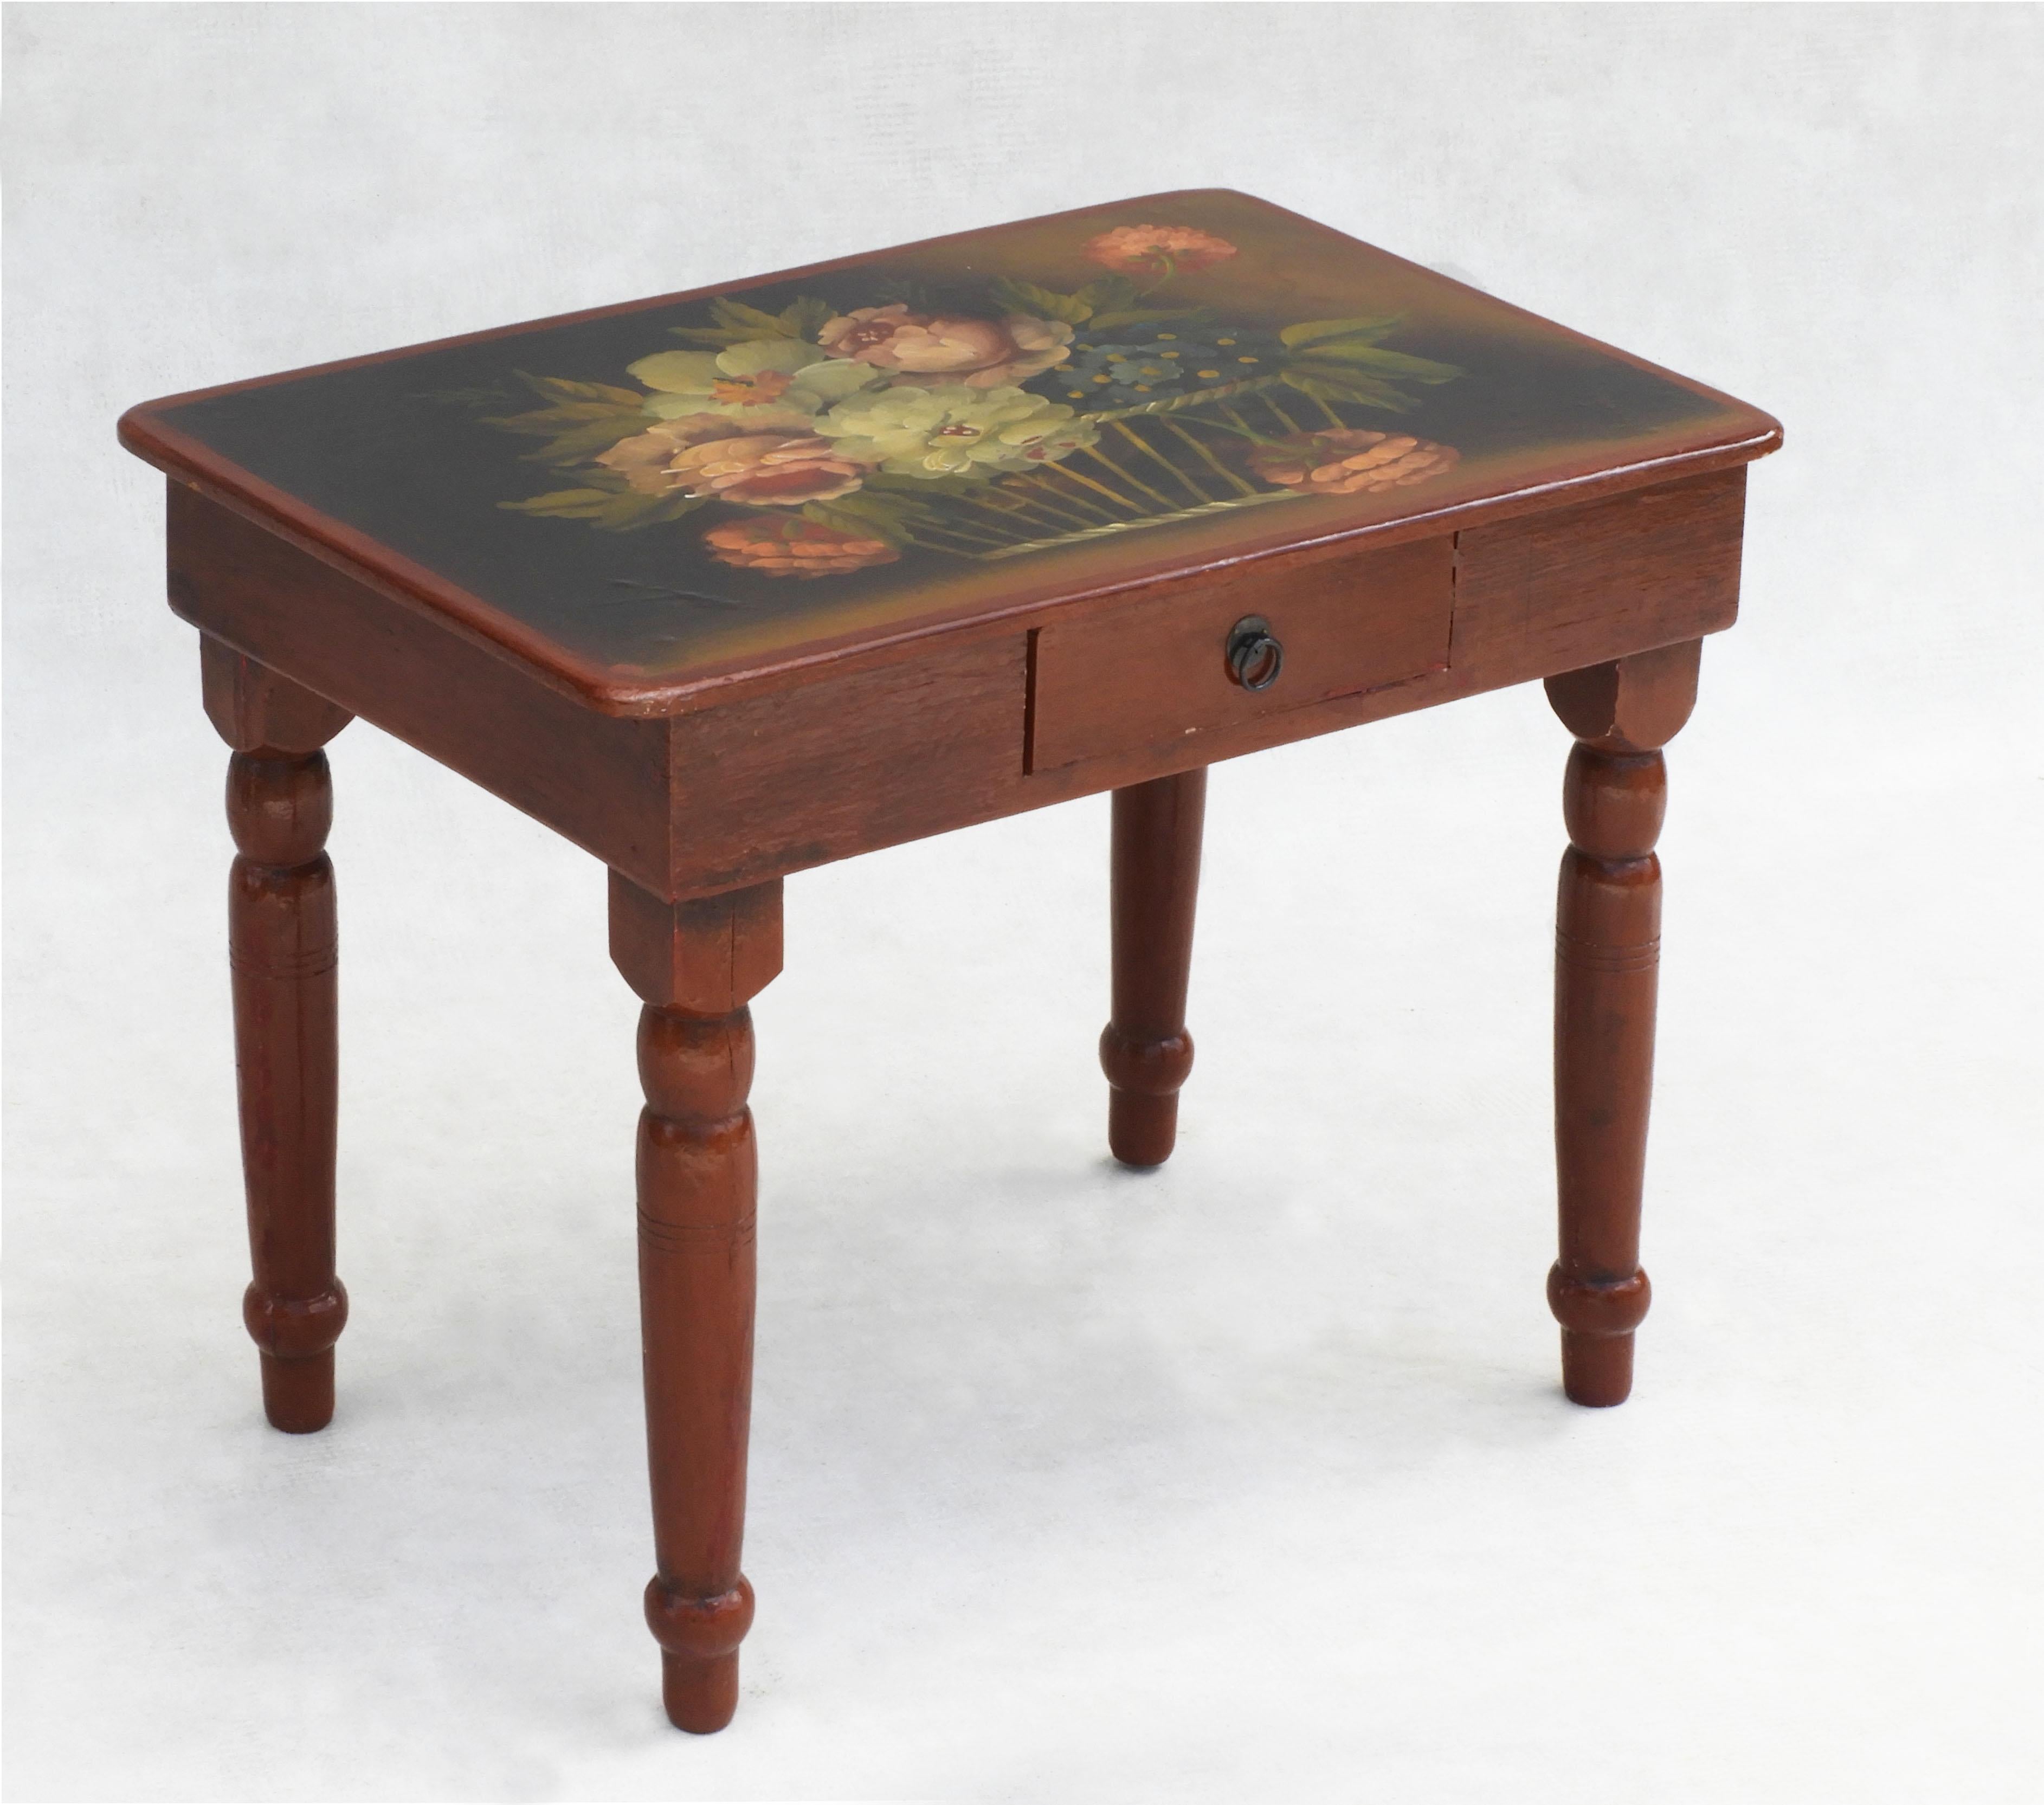 Hand-Painted French Hand Painted Side Table Early 20th Century Folk Art  For Sale